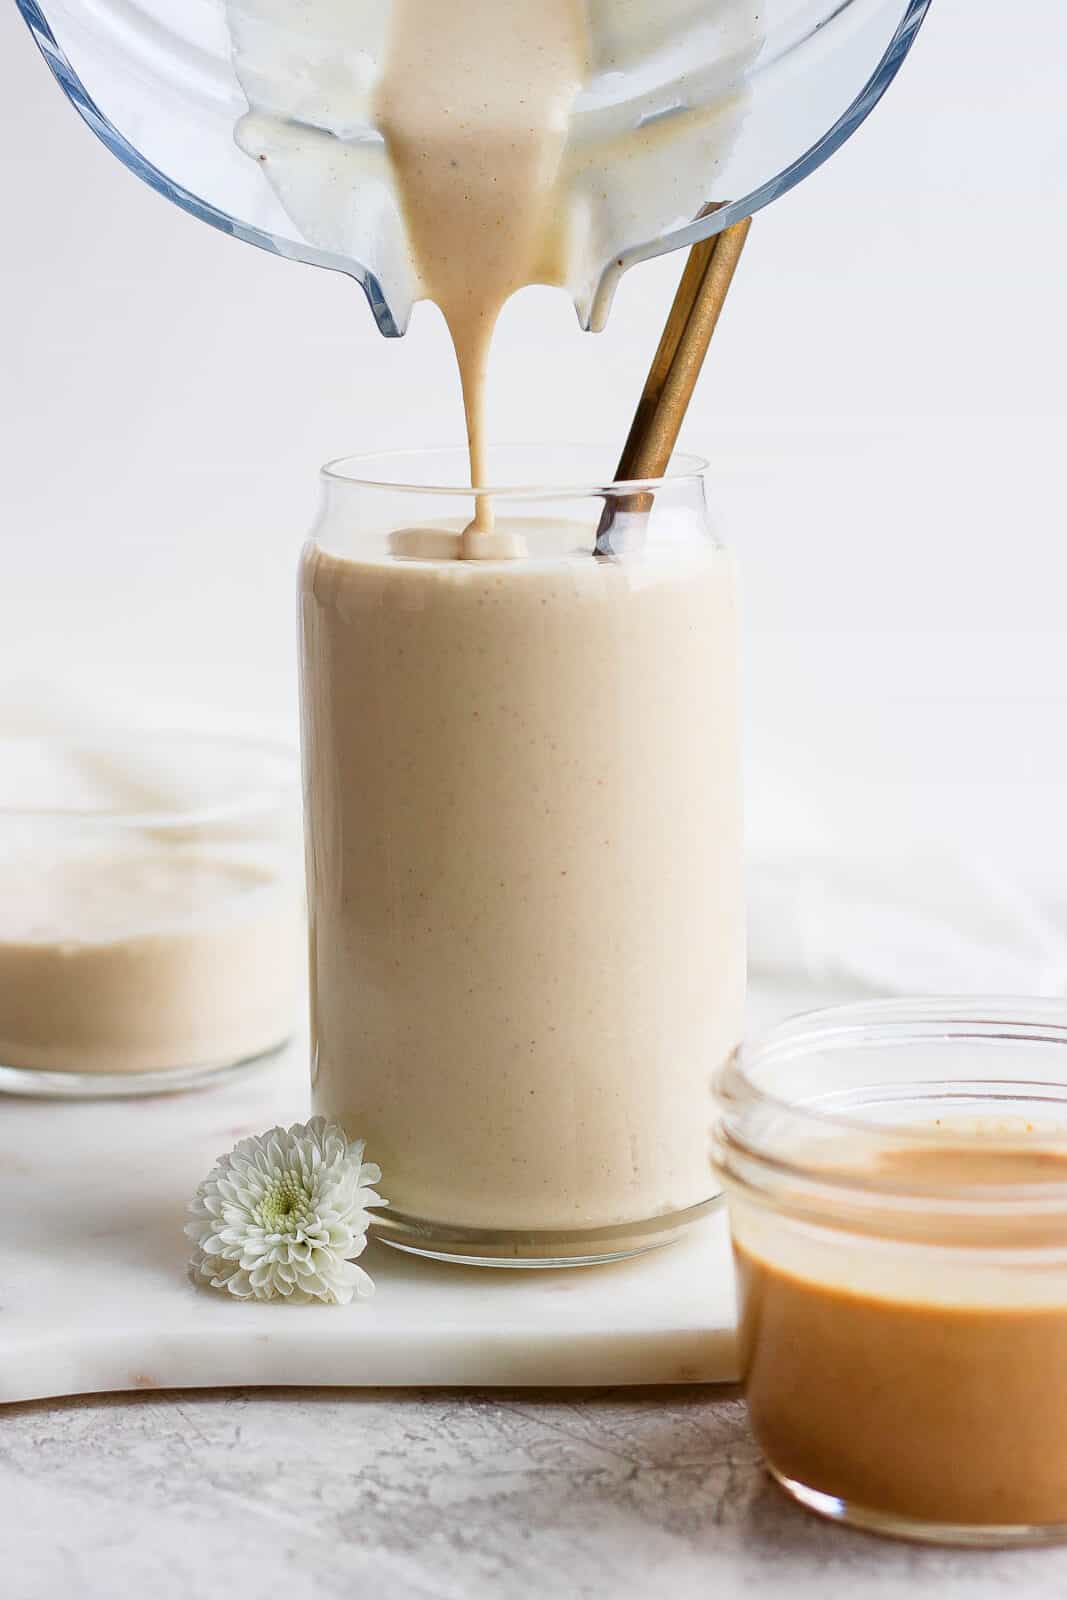 Peanut butter banana smoothie being poured from a blender to a glass.